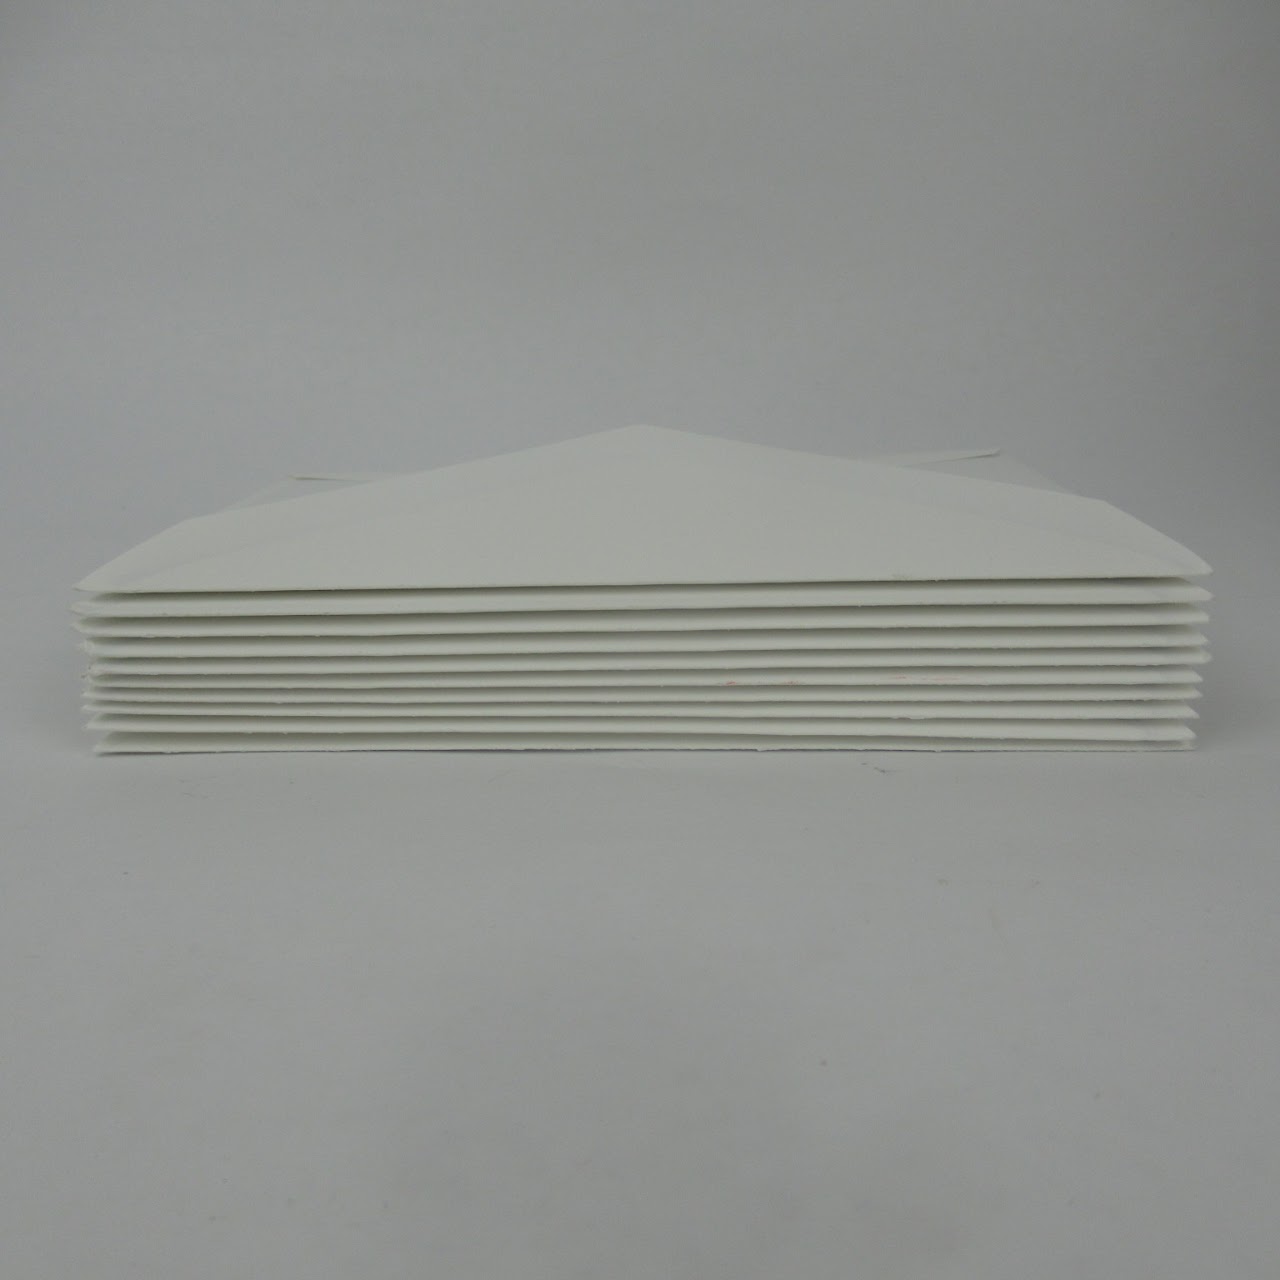 Cartier Boxed Notecards